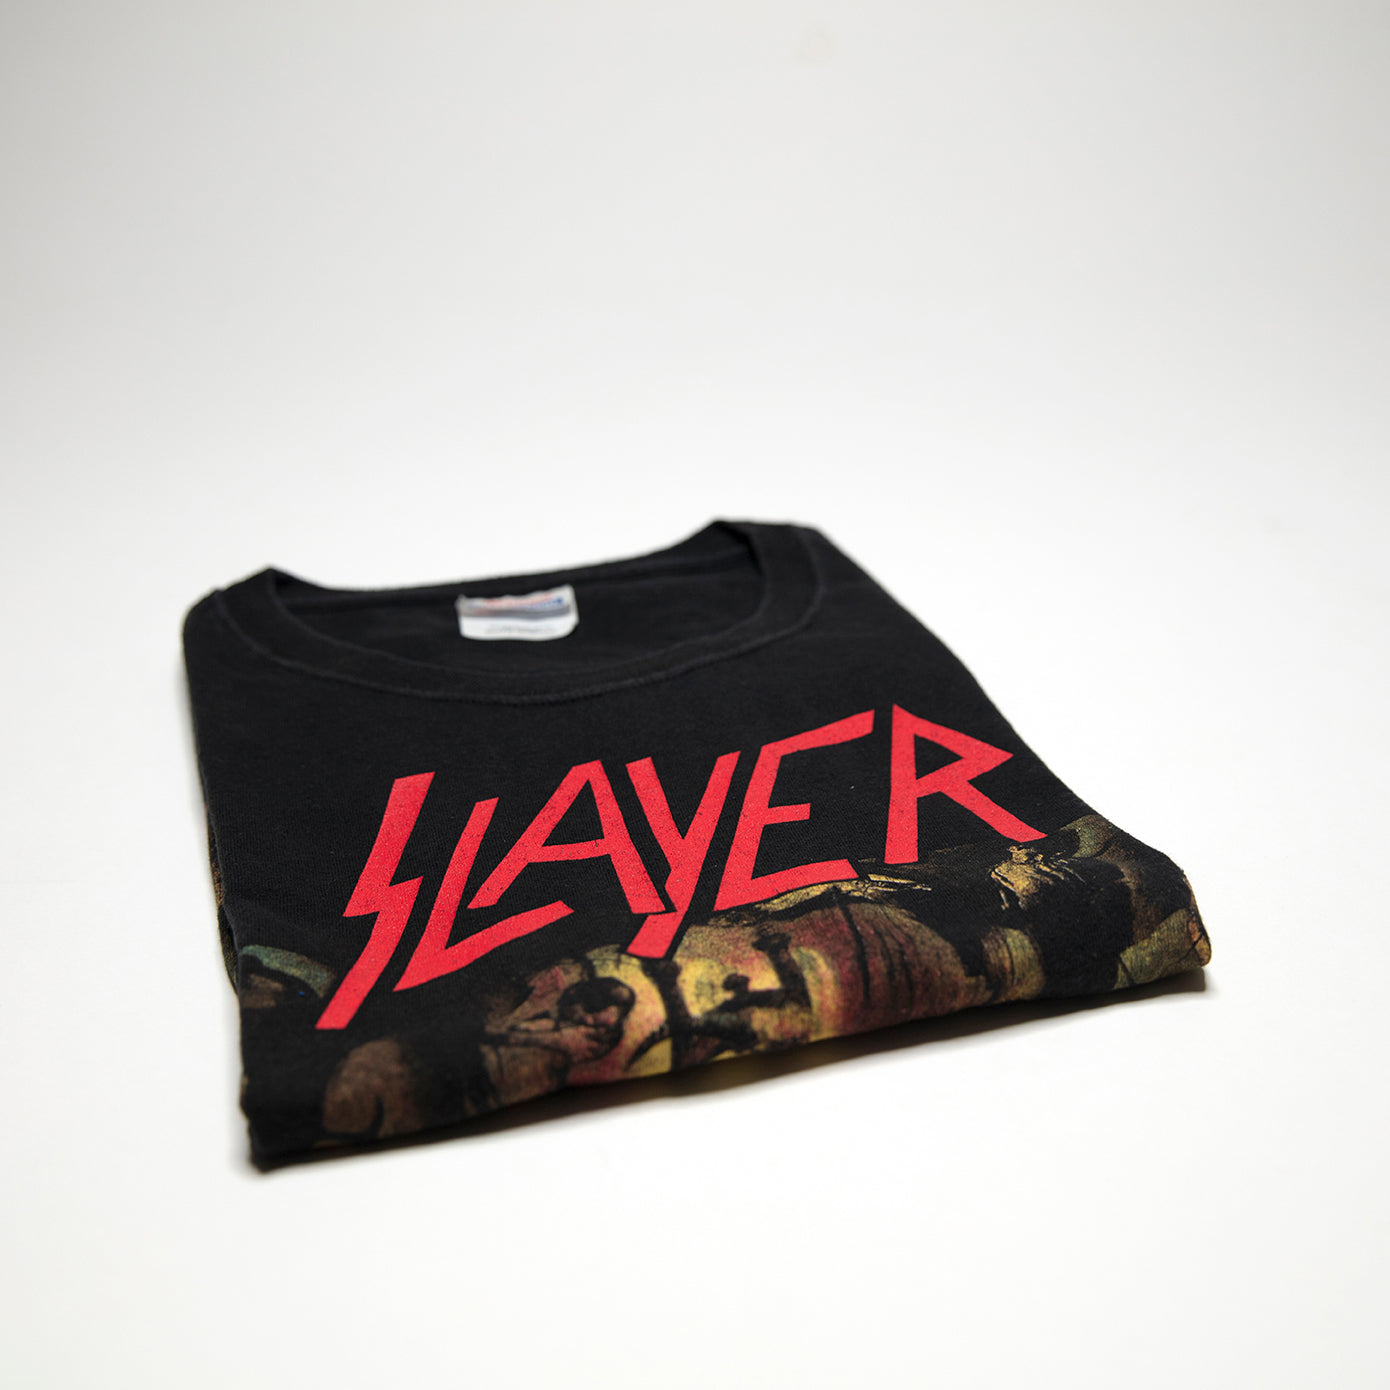 Slayer - Do You Want To Die 2004 Tour Shirt Size XL